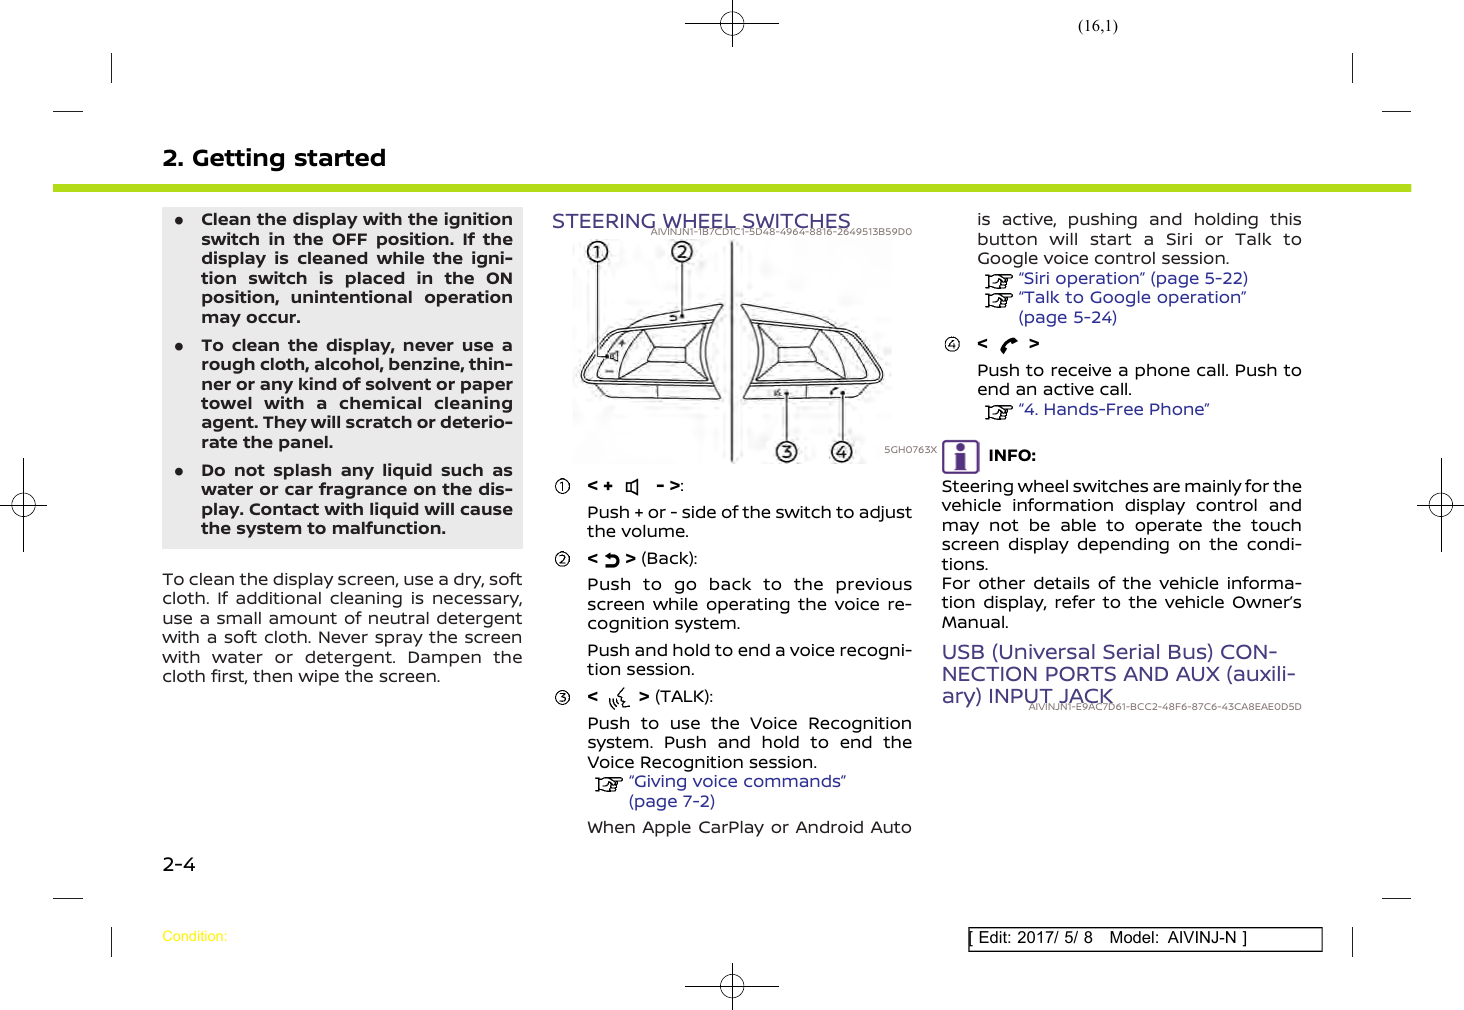 Page 16 of Robert Bosch Car Multimedia AIVICMFB0 Navigation System with Bluetooth and WLAN User Manual